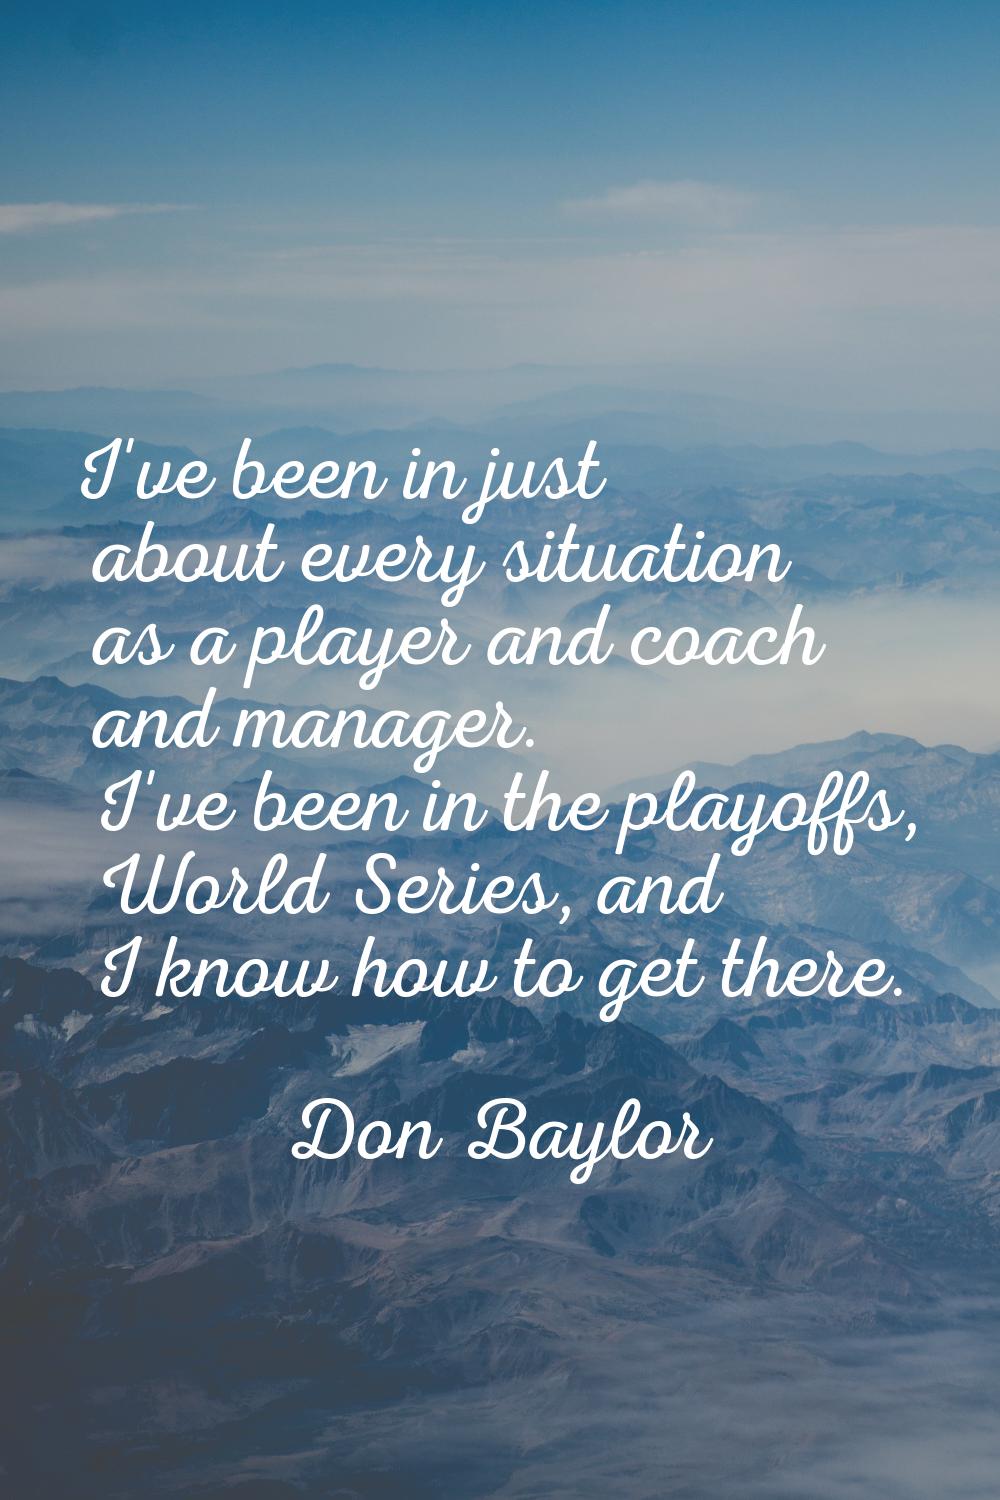 I've been in just about every situation as a player and coach and manager. I've been in the playoff